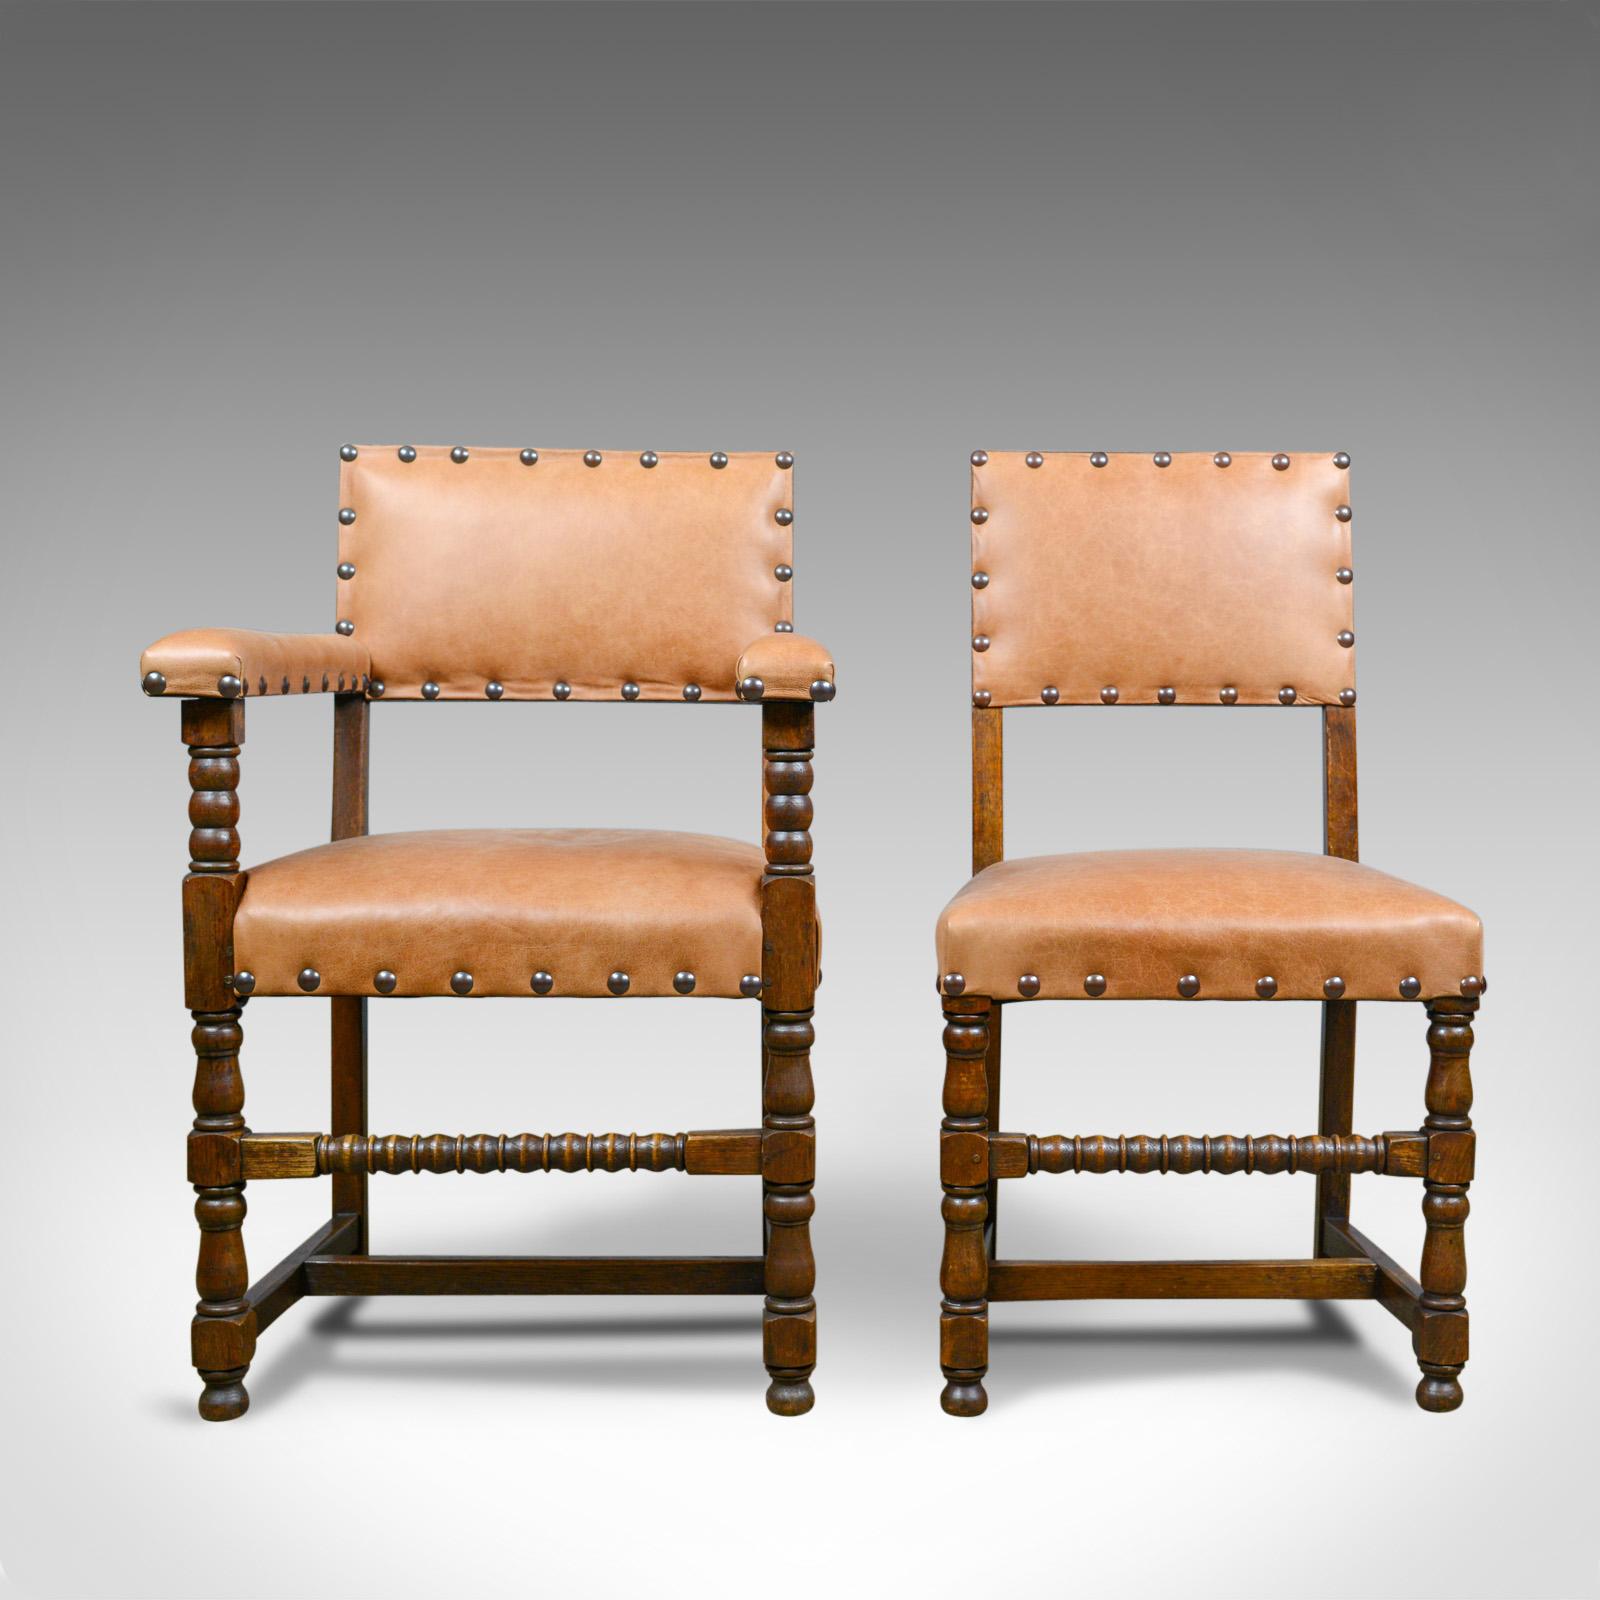 This is a set of six antique dining chairs, Edwardian 17th century revival. Crafted in English oak and leather and dating to the early 20th century, circa 1910.

A pair of carvers plus four side chairs
Edwardian in a 17th century style
In fine